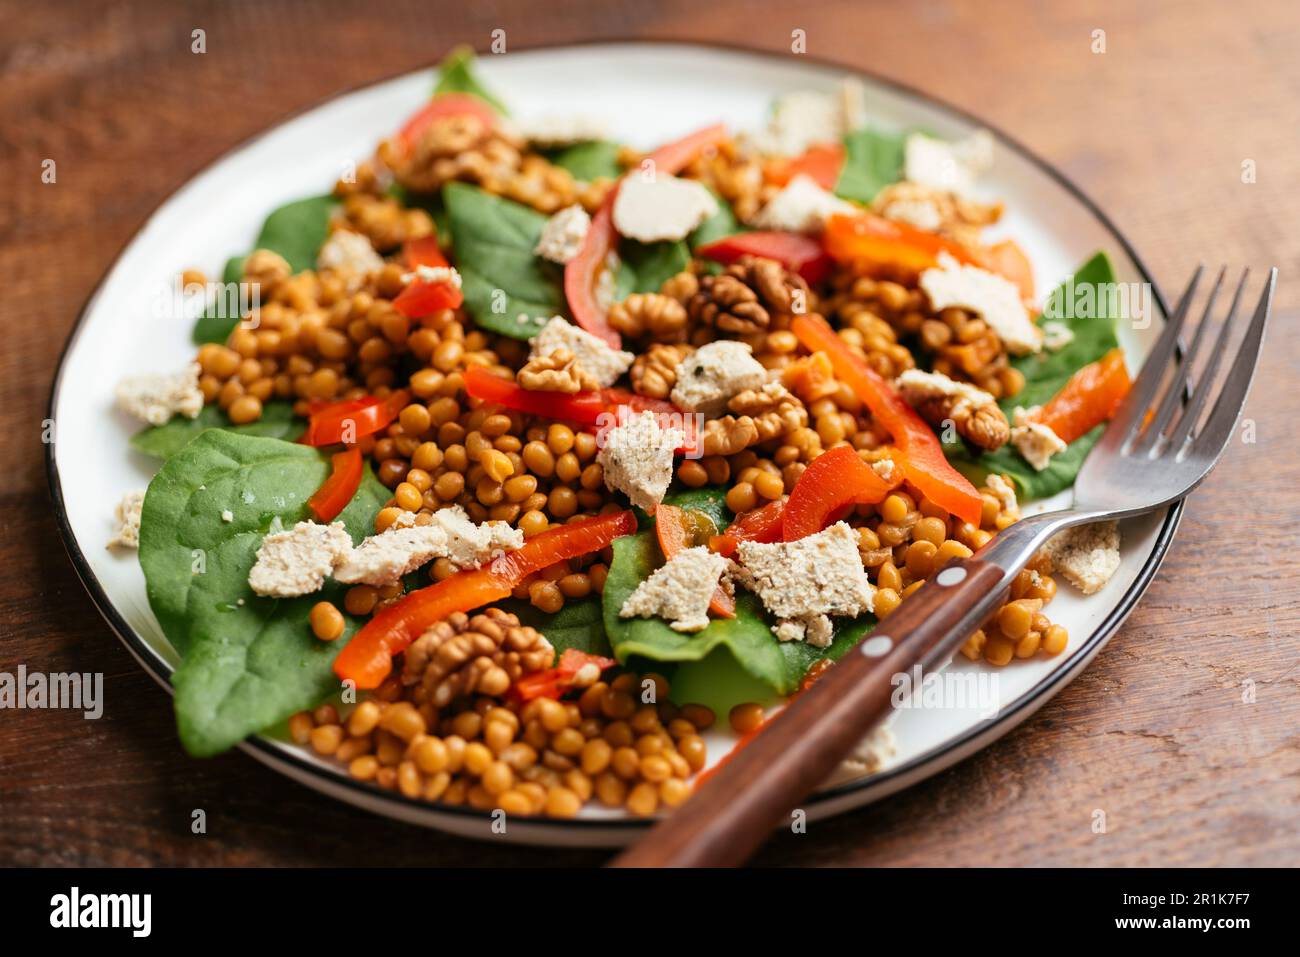 Spinach and Lentil Salad with Roasted Peppers, Walnuts and Vegan Feta Stock Photo